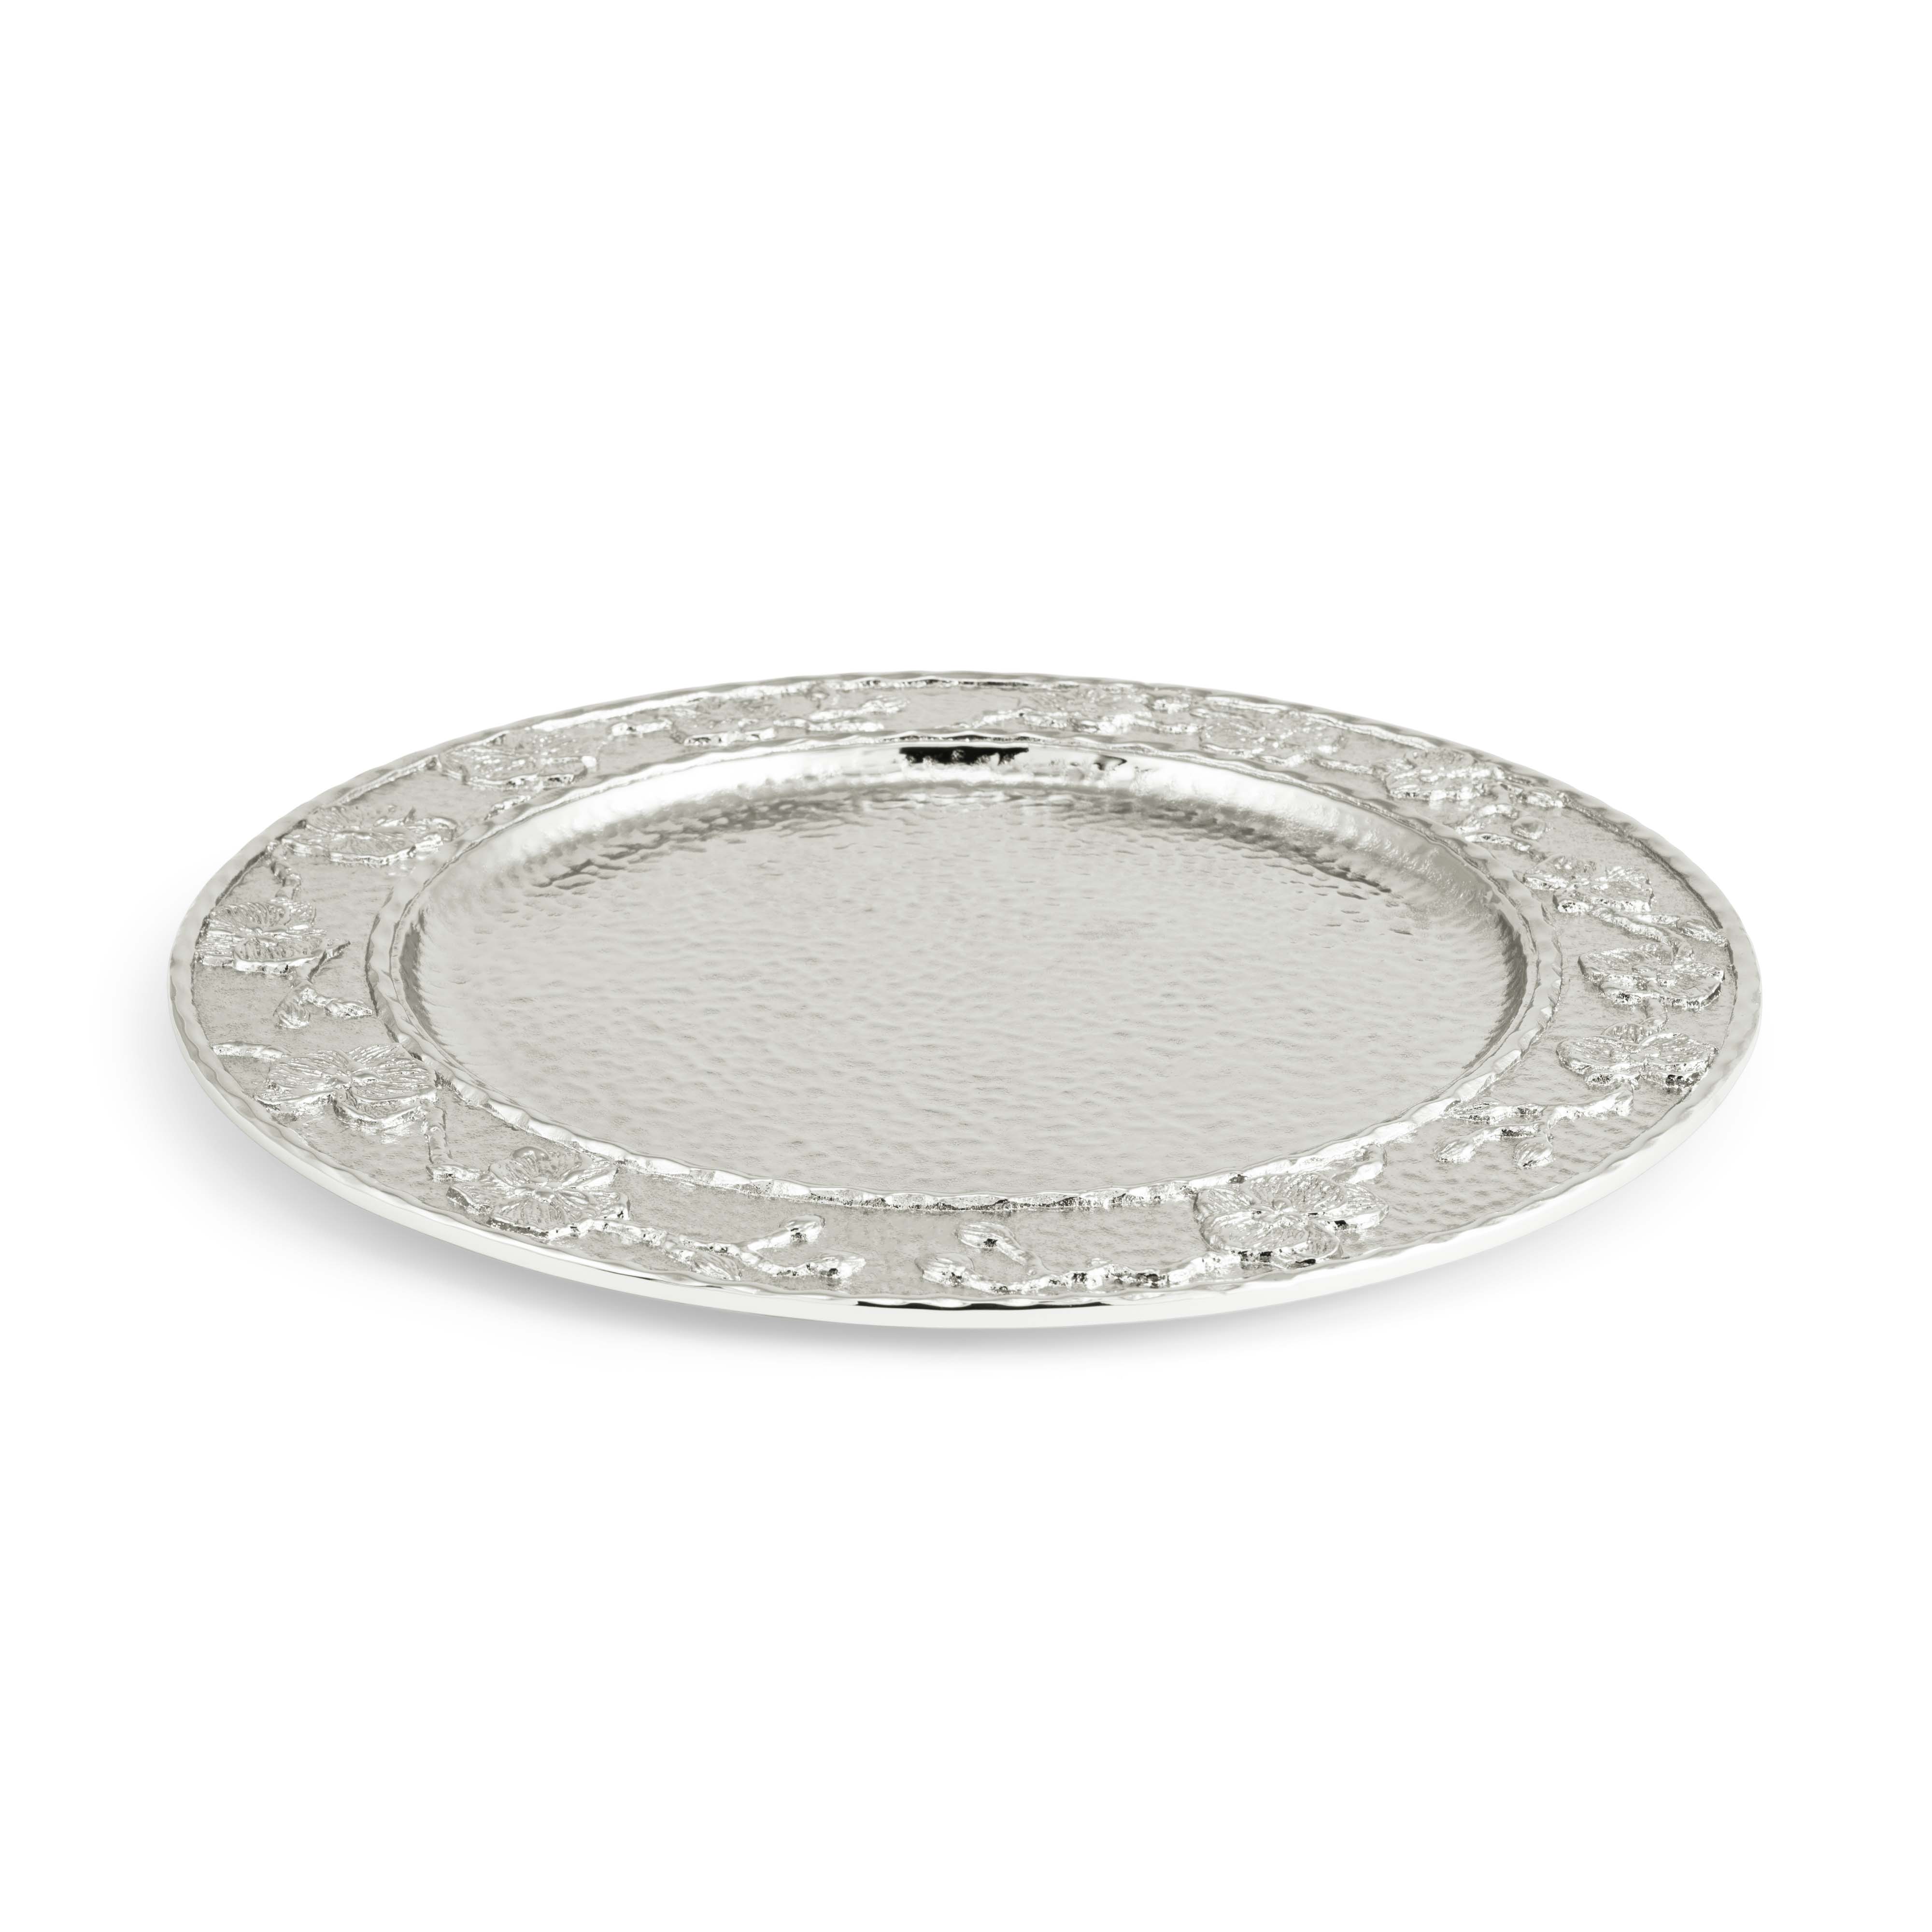 White Orchid Charger Plate